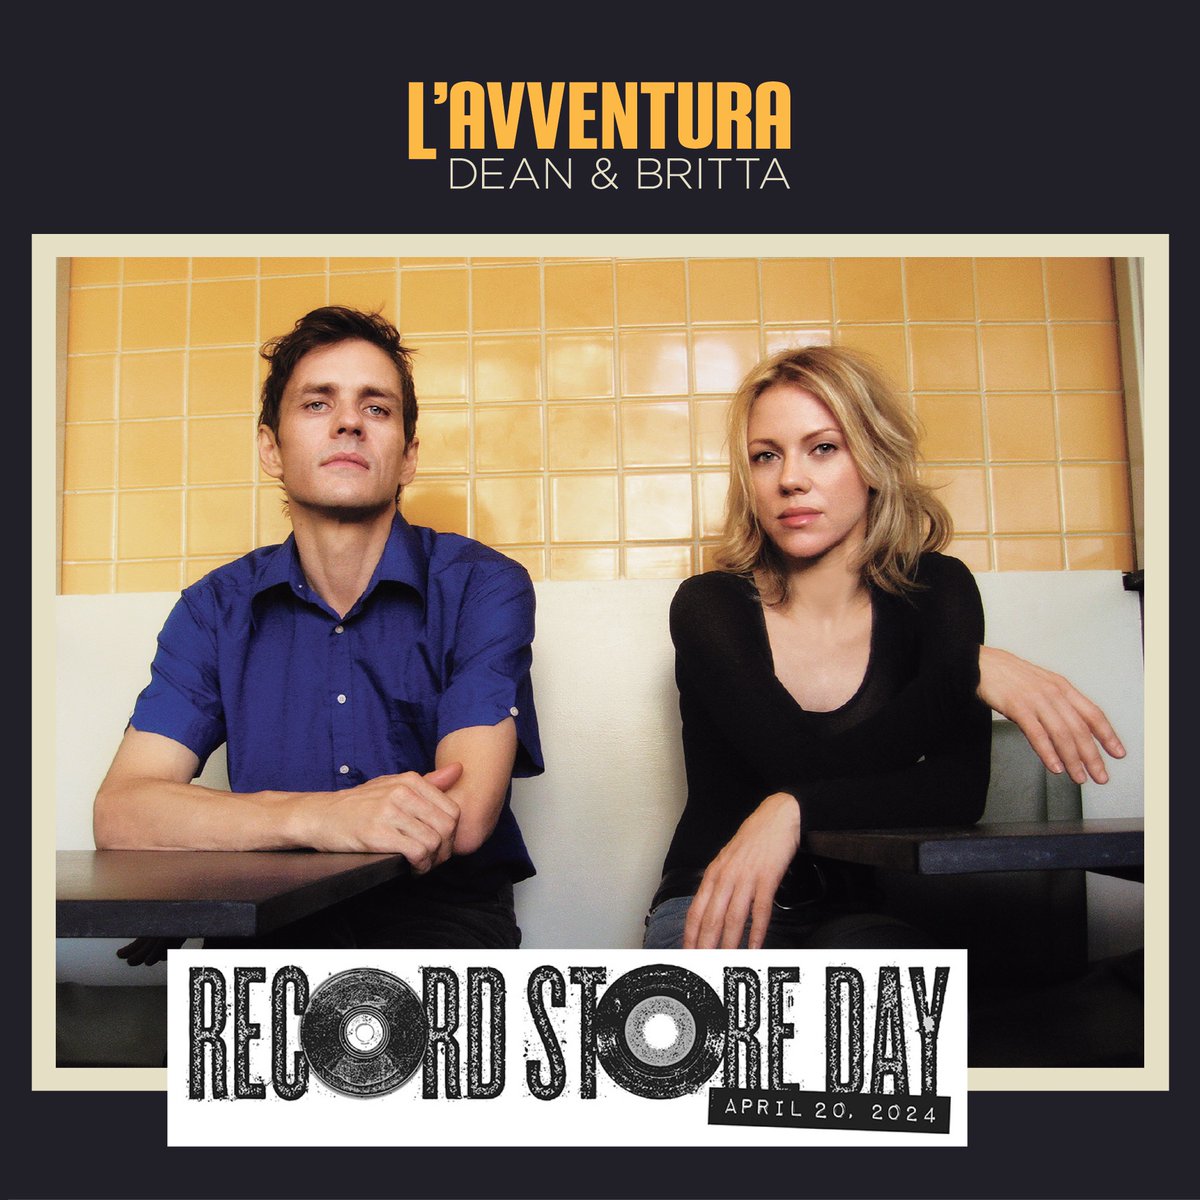 coming April 20 for @recordstoreday -- 20th anniversary deluxe 2LP set with L'Avventura album, Sonic Souvenirs EP and Words You Used to Say @brittaphillips @2020sonicboom